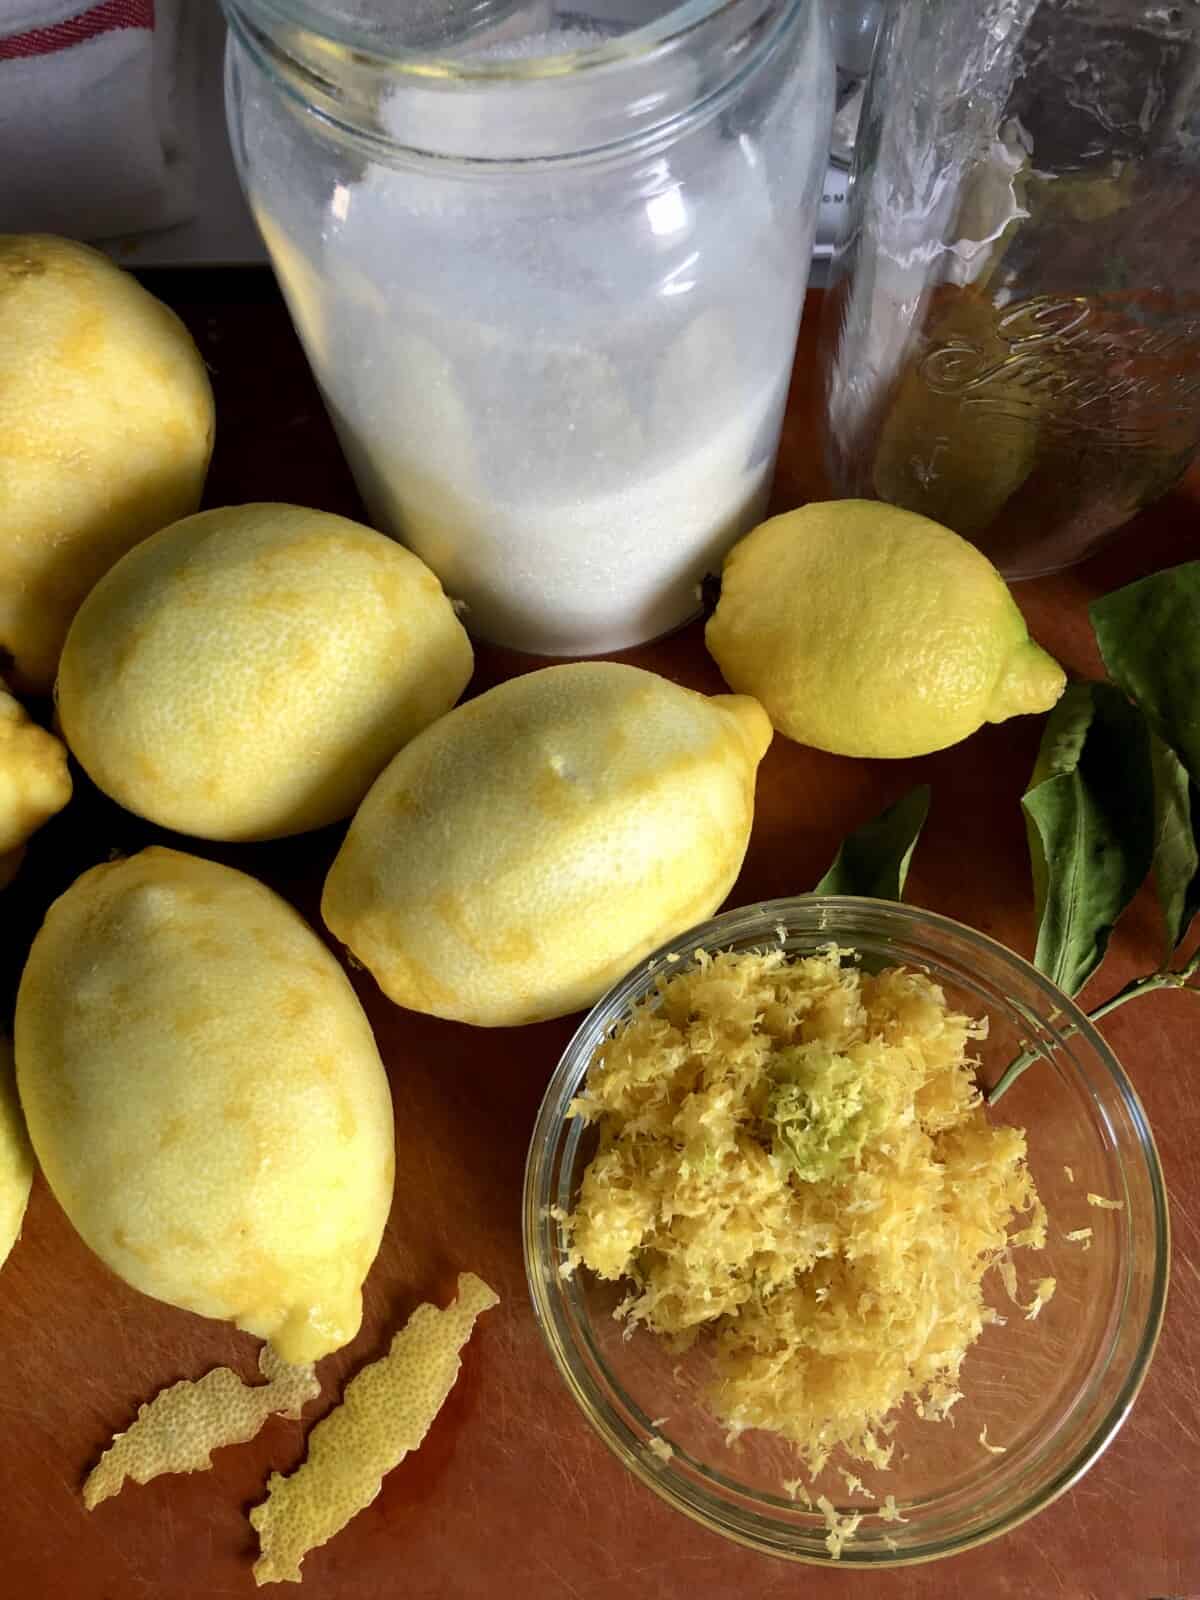 fully zested and peeled lemons lying on a cutting board with a sugar jar, alcohol, and a bowl full of zest